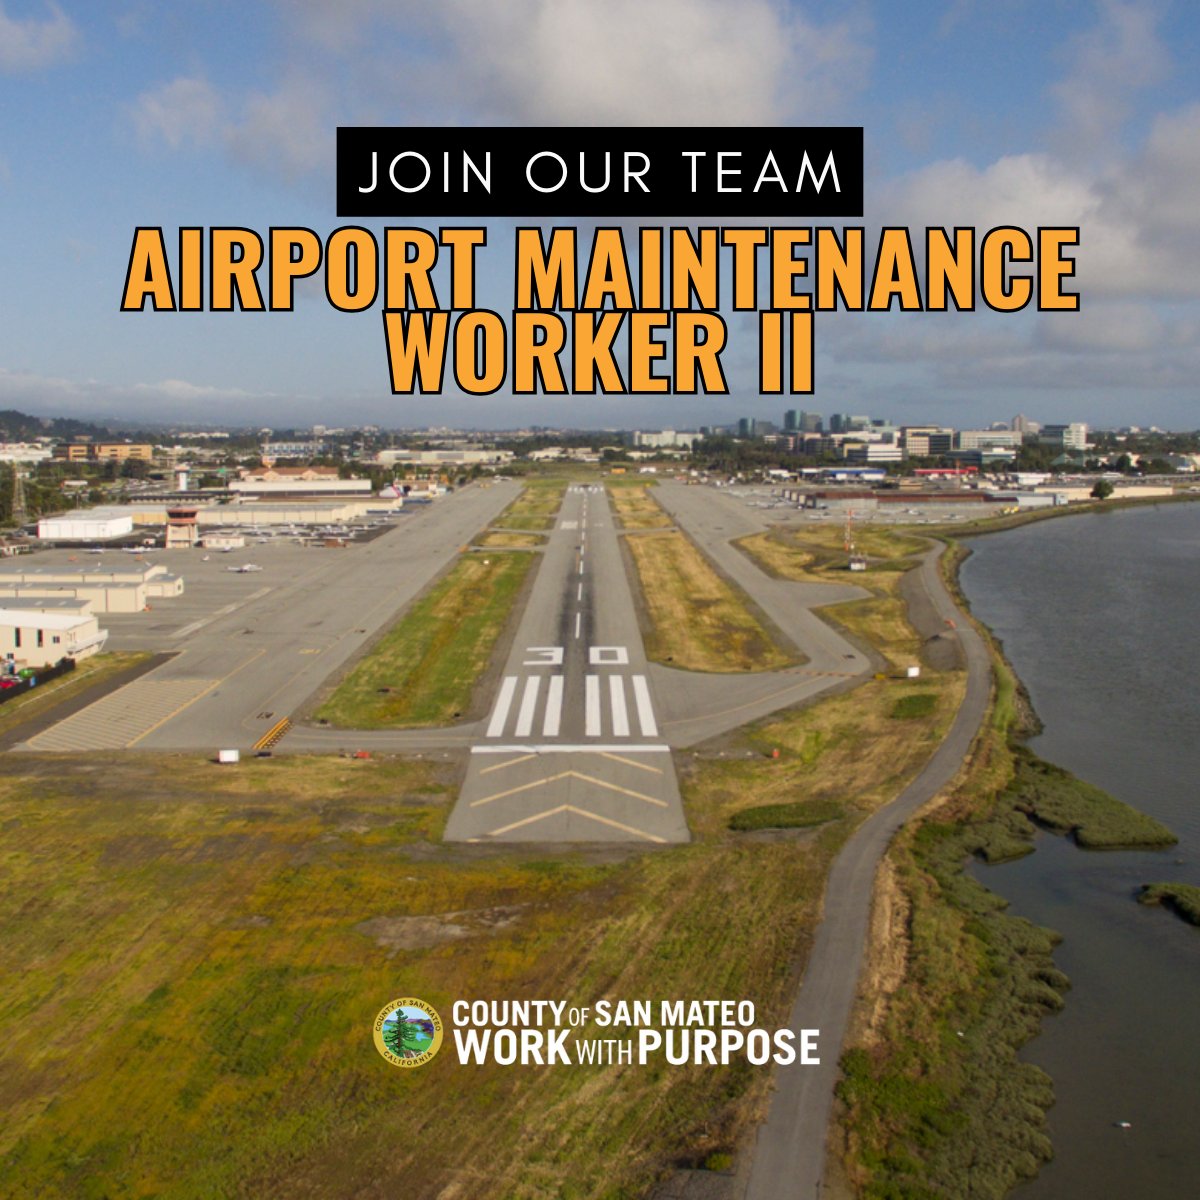 Join our team at the County of San Mateo Airports as an Airport Maintenance Worker II and enjoy working in a dynamic environment that promises a fulfilling work experience like no other. Apply here: governmentjobs.com/careers/sanmat… #WorkWithPurpose